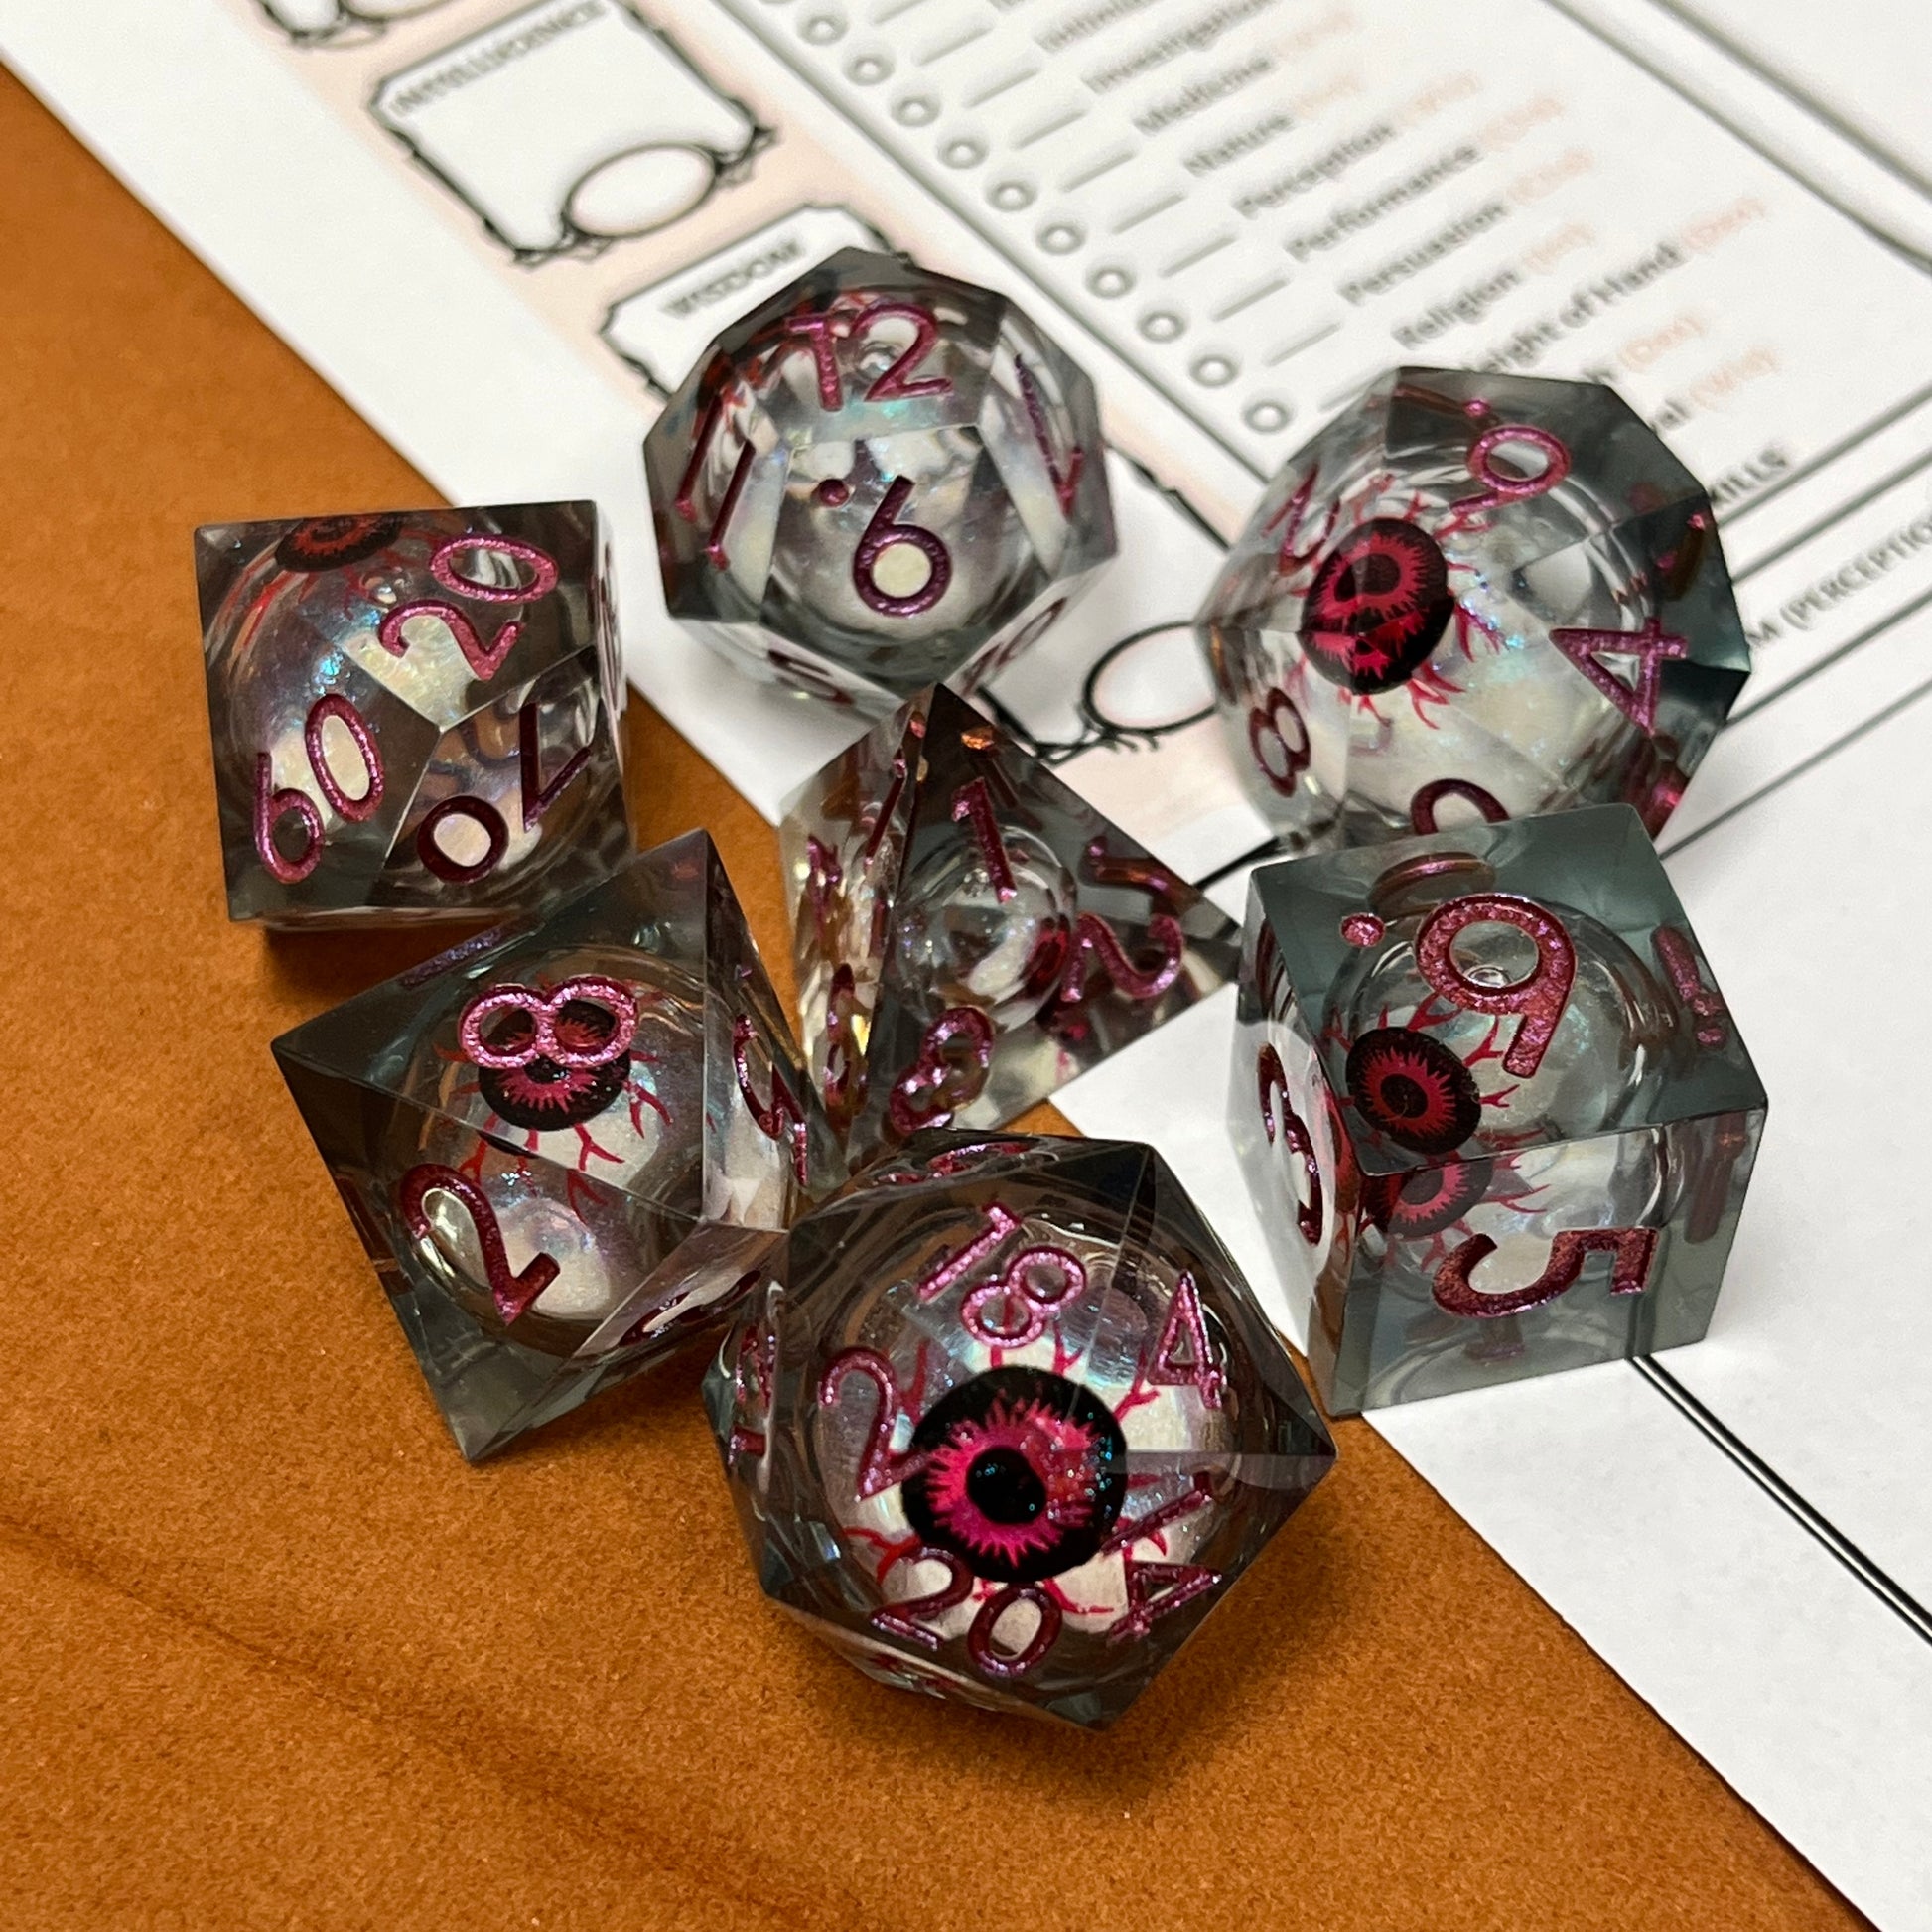 Old Red Eyes, DND liquid core dice set, polyhedral dice, role playing, role playing games, TTRPG